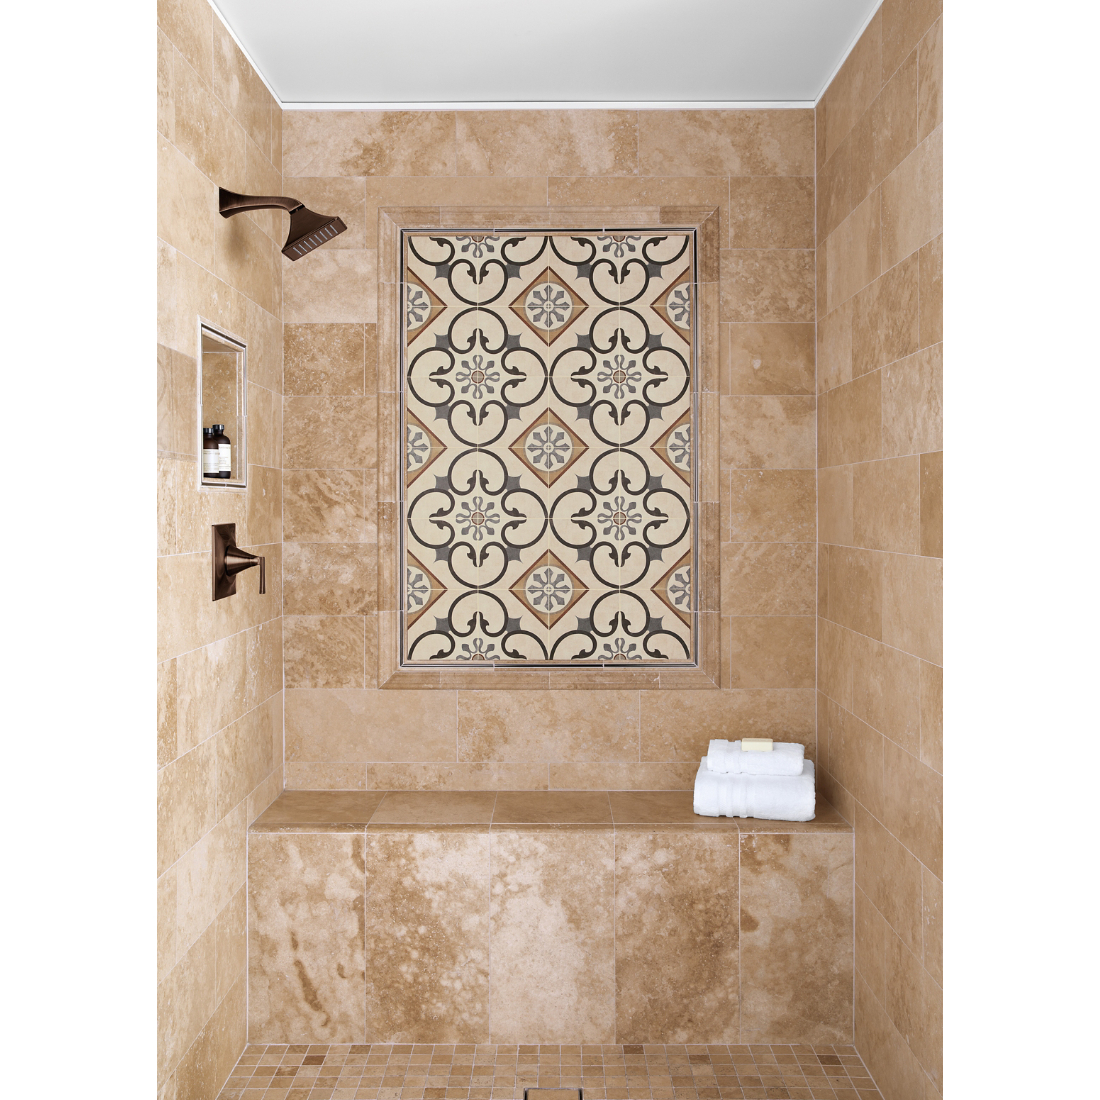 Walk in shower with Travertine stone tile and a feature frame with a porcelain patterned tile framed in both metal and stone profiles.  Recessed niche and shower bench complete the area.